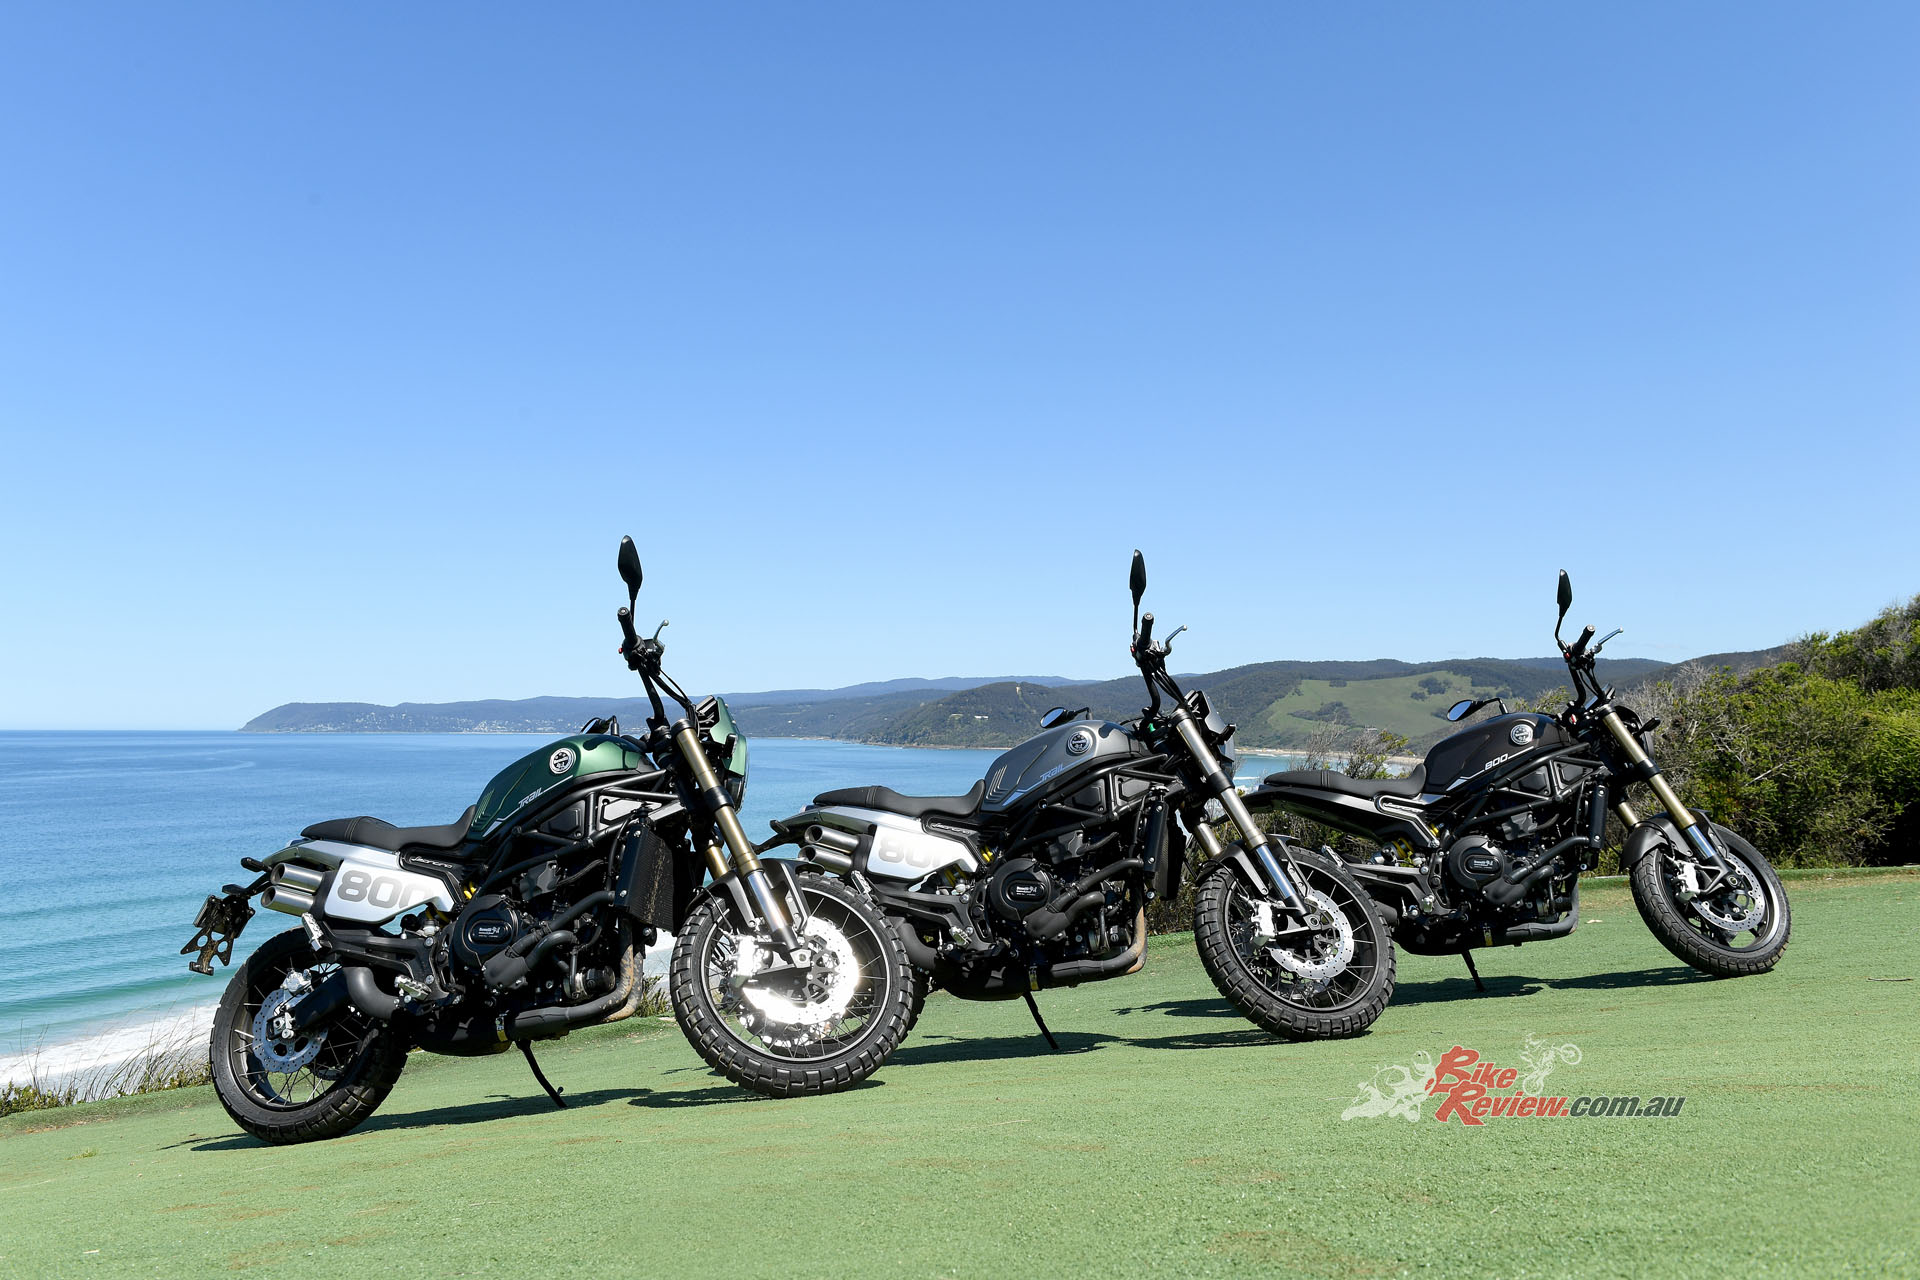 We sent Zane down to Victoria to check out the new Benelli Leoncino 800 and 800 Trail. Check out what he thought of them...